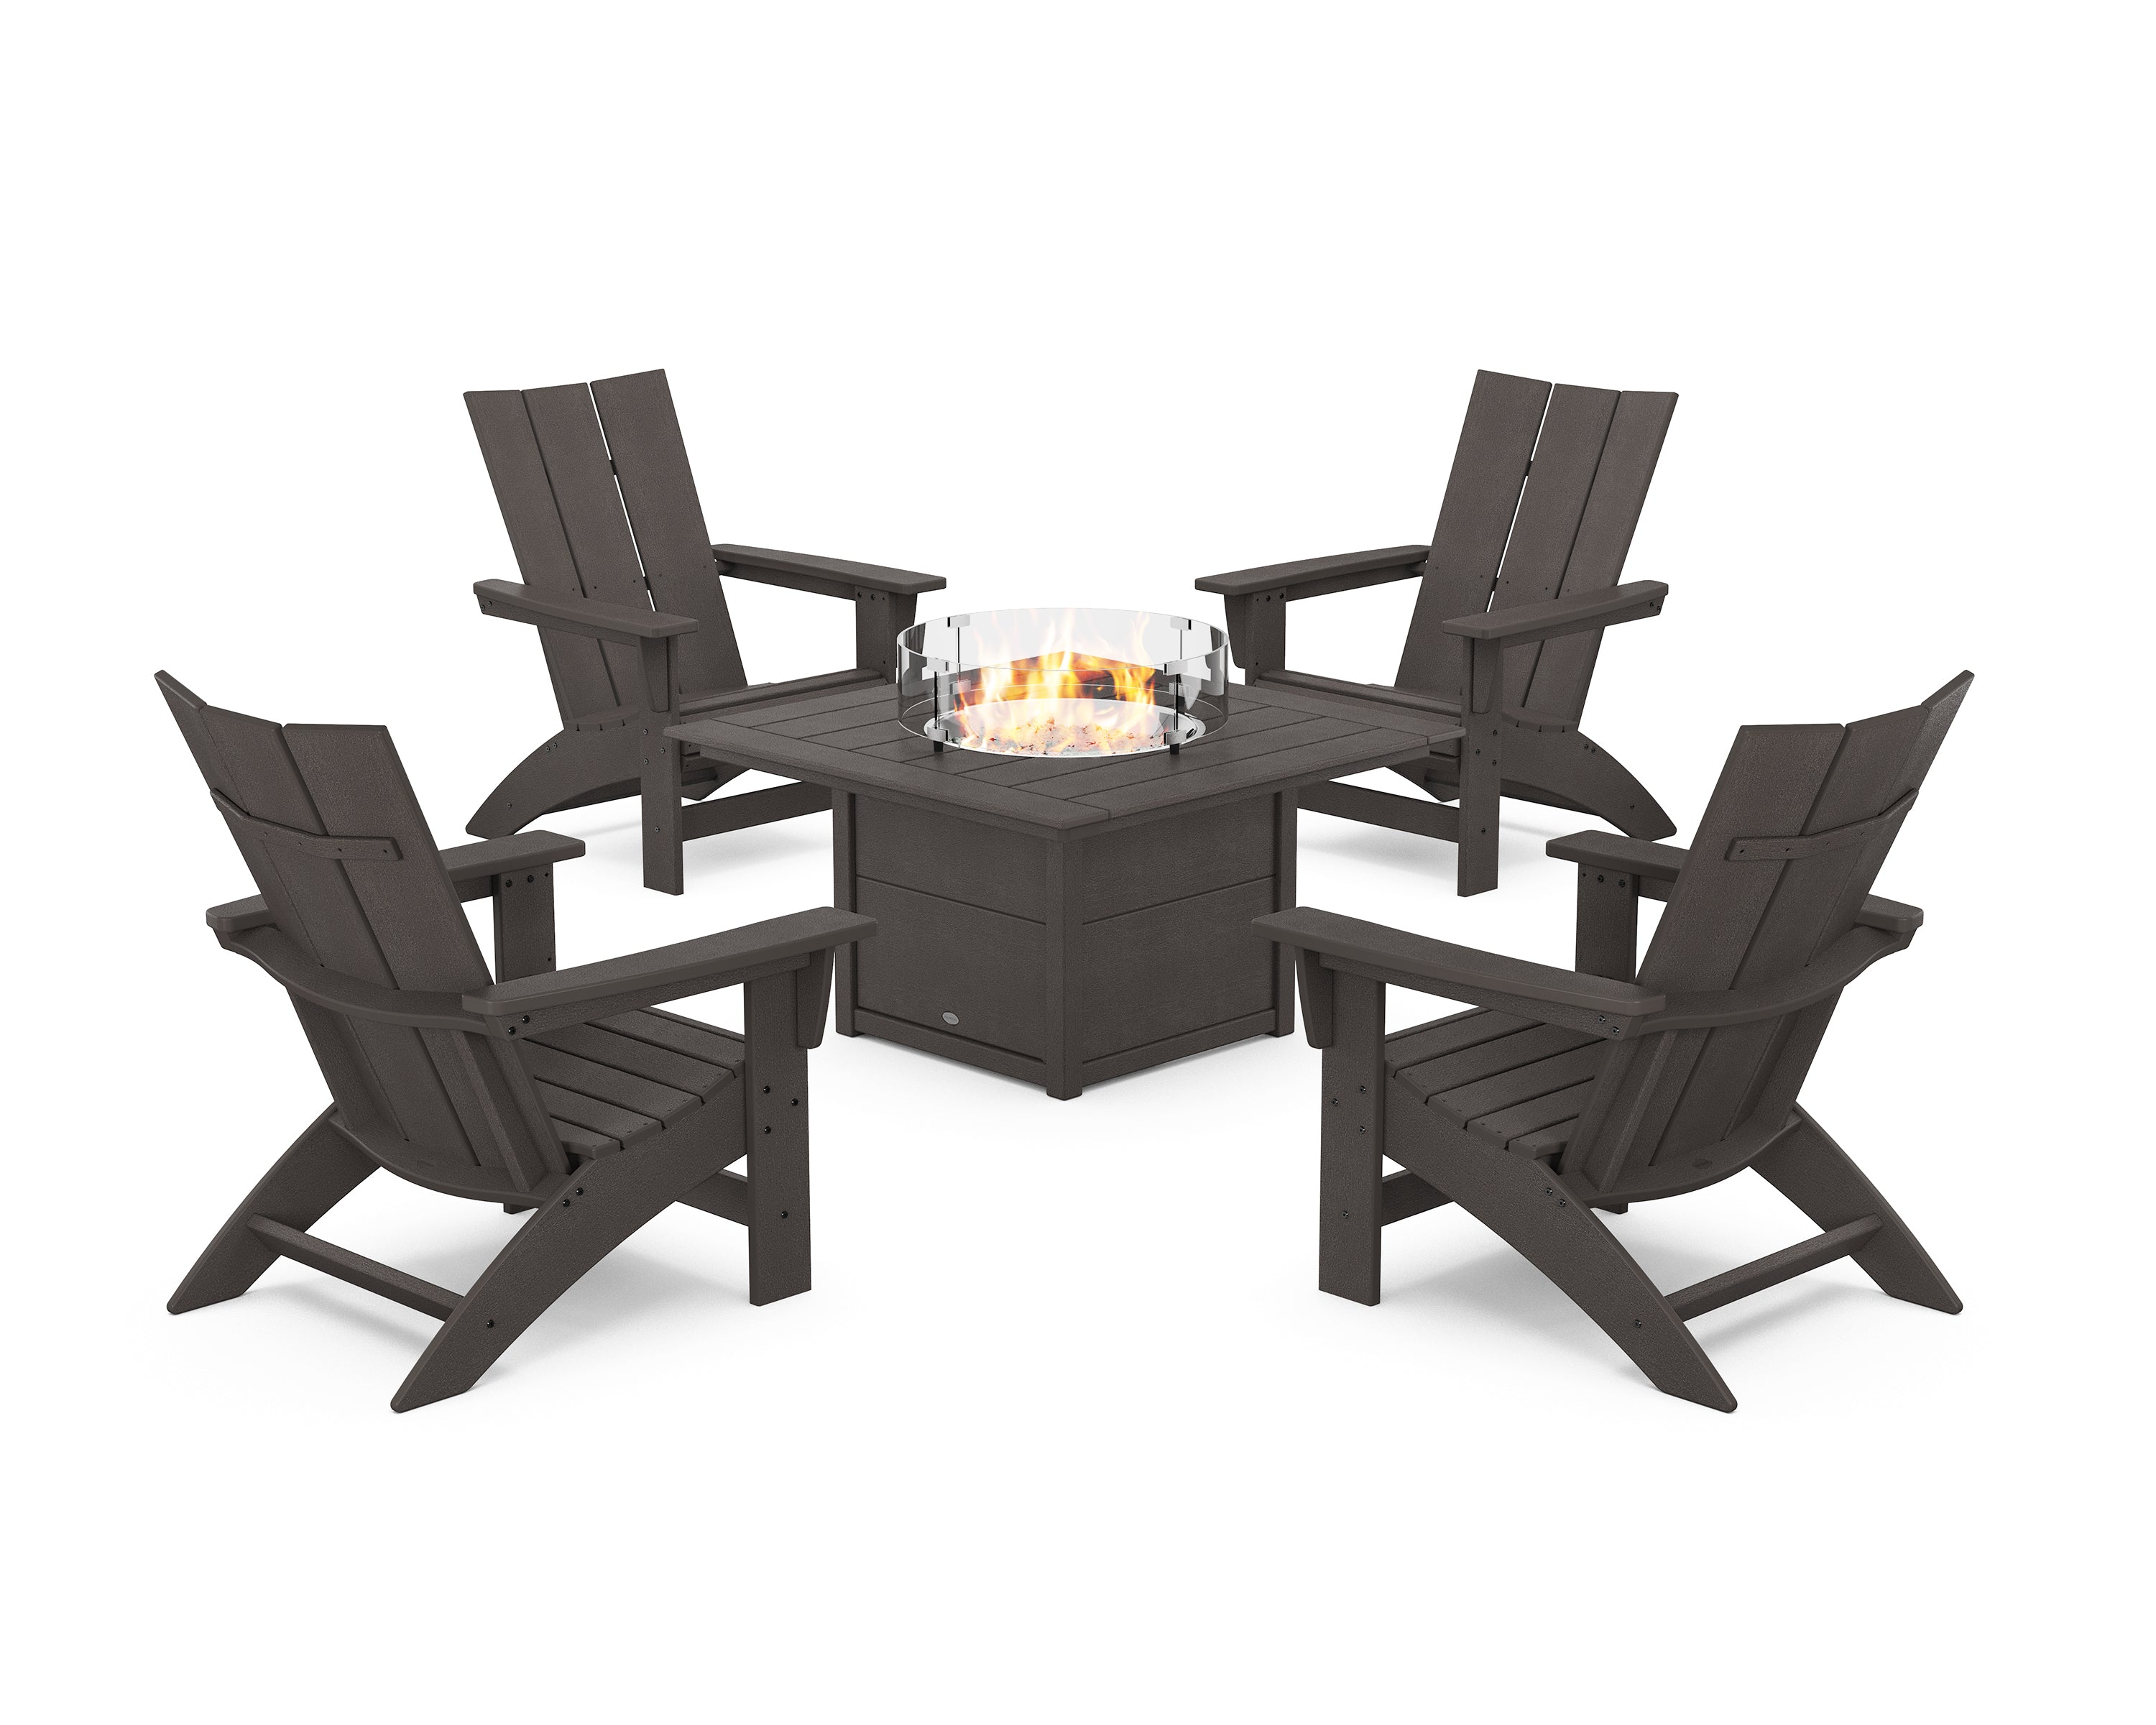 POLYWOOD® 5-Piece Modern Grand Adirondack Conversation Set with Fire Pit Table in Vintage Coffee